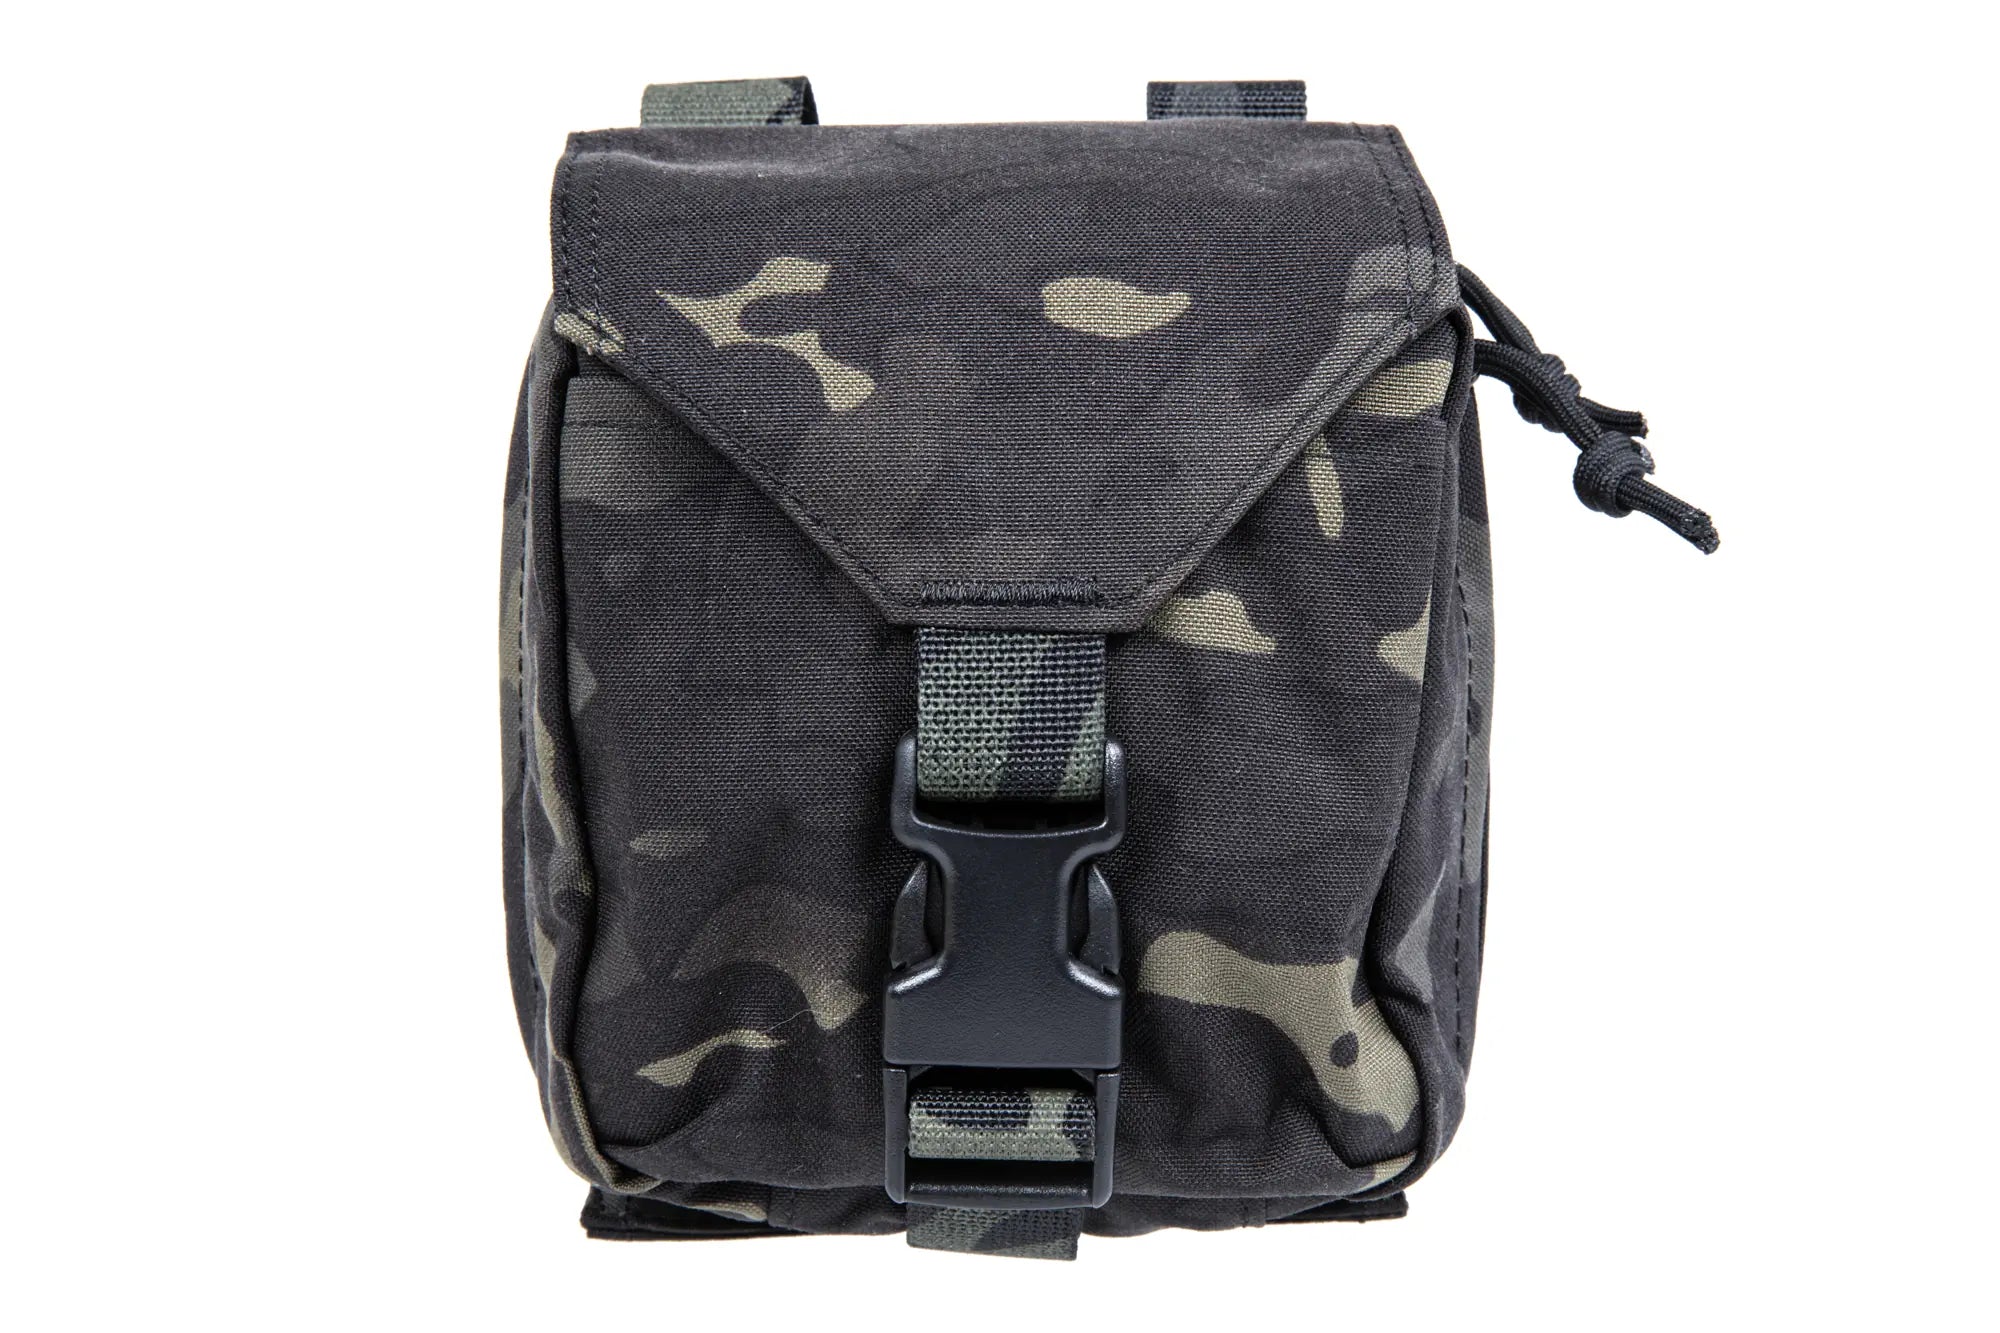 First aid kit with Molle panel Wosport Multicam Black-3